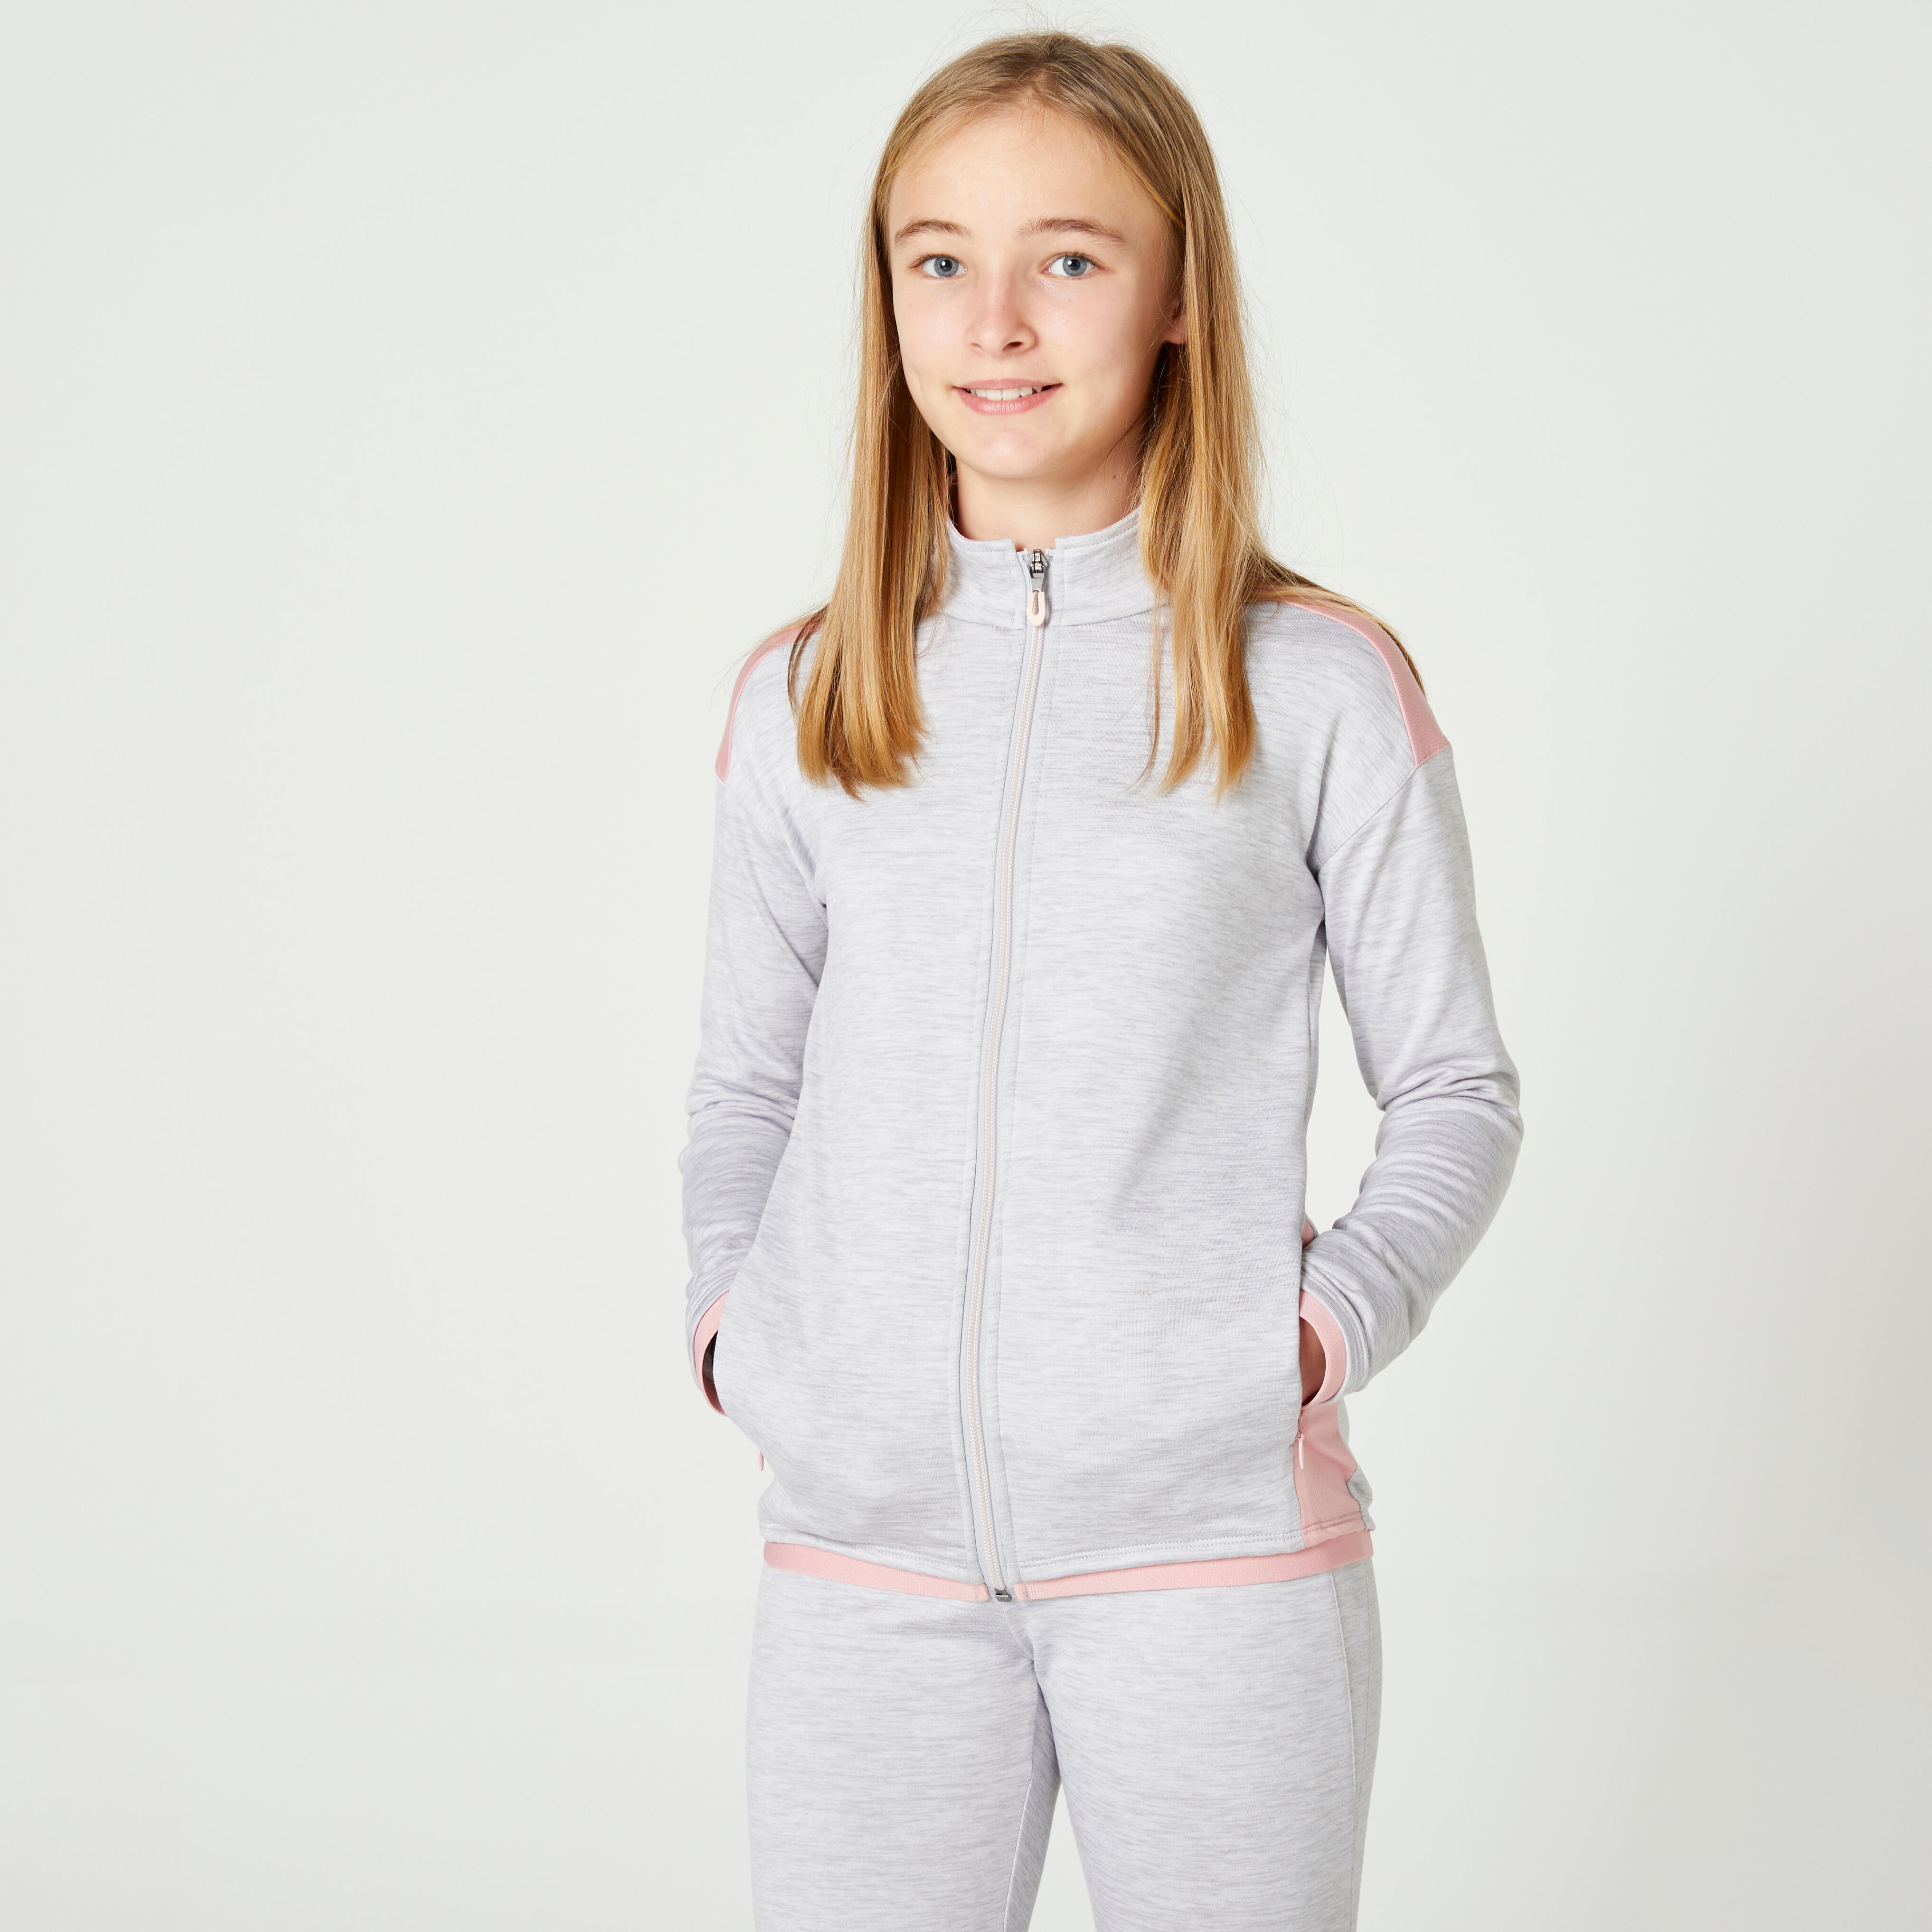 S 500 Synthetic Tracksuit - Kids - Grey, Pink - Domyos - Decathlon